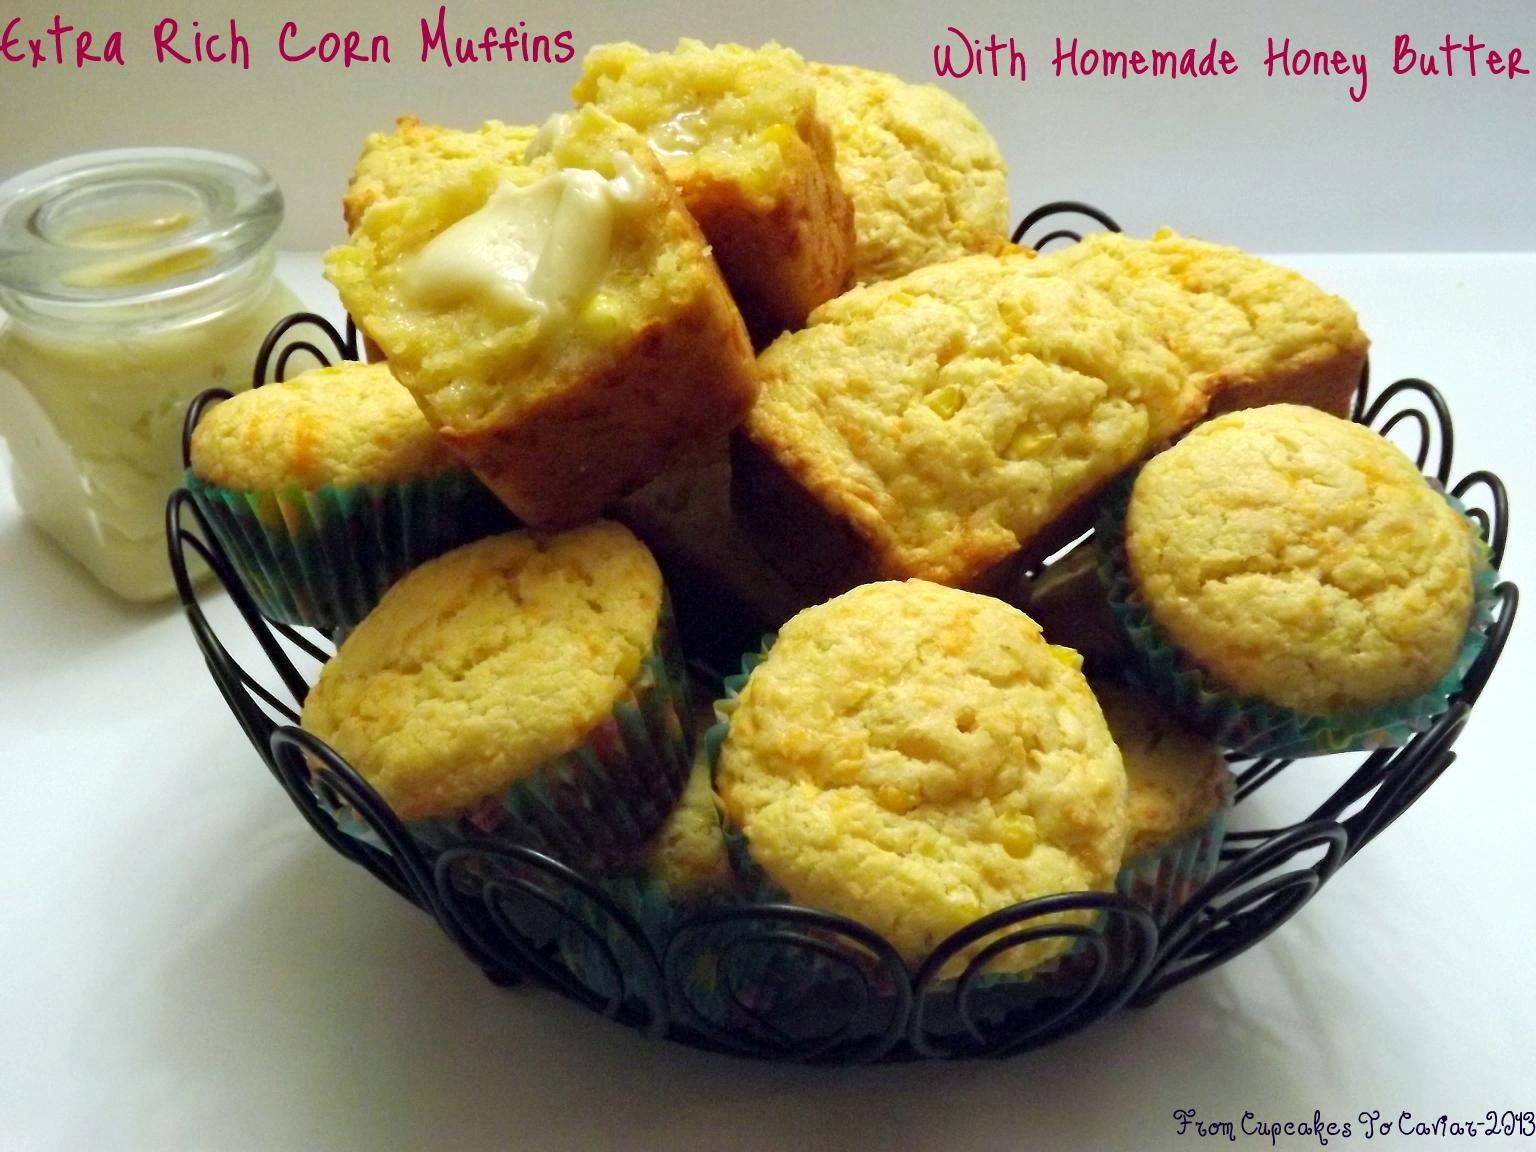 Extra-Rich-Corn-Muffins-With-Homemade-Honey-Butter